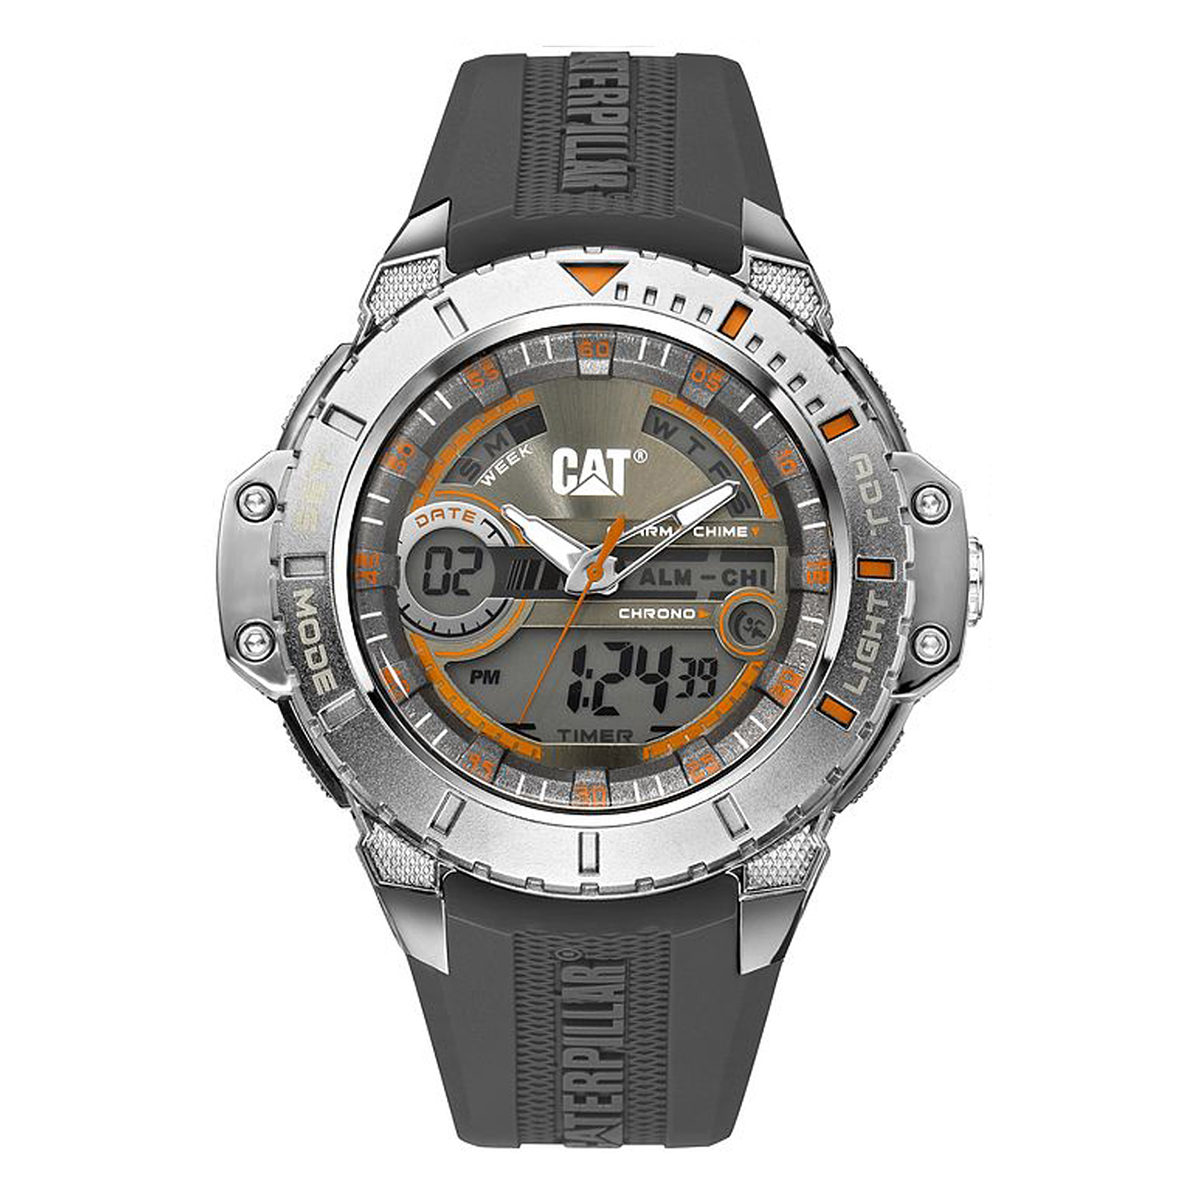 MONTRE CAT HOMME DIGITAL SILICONE